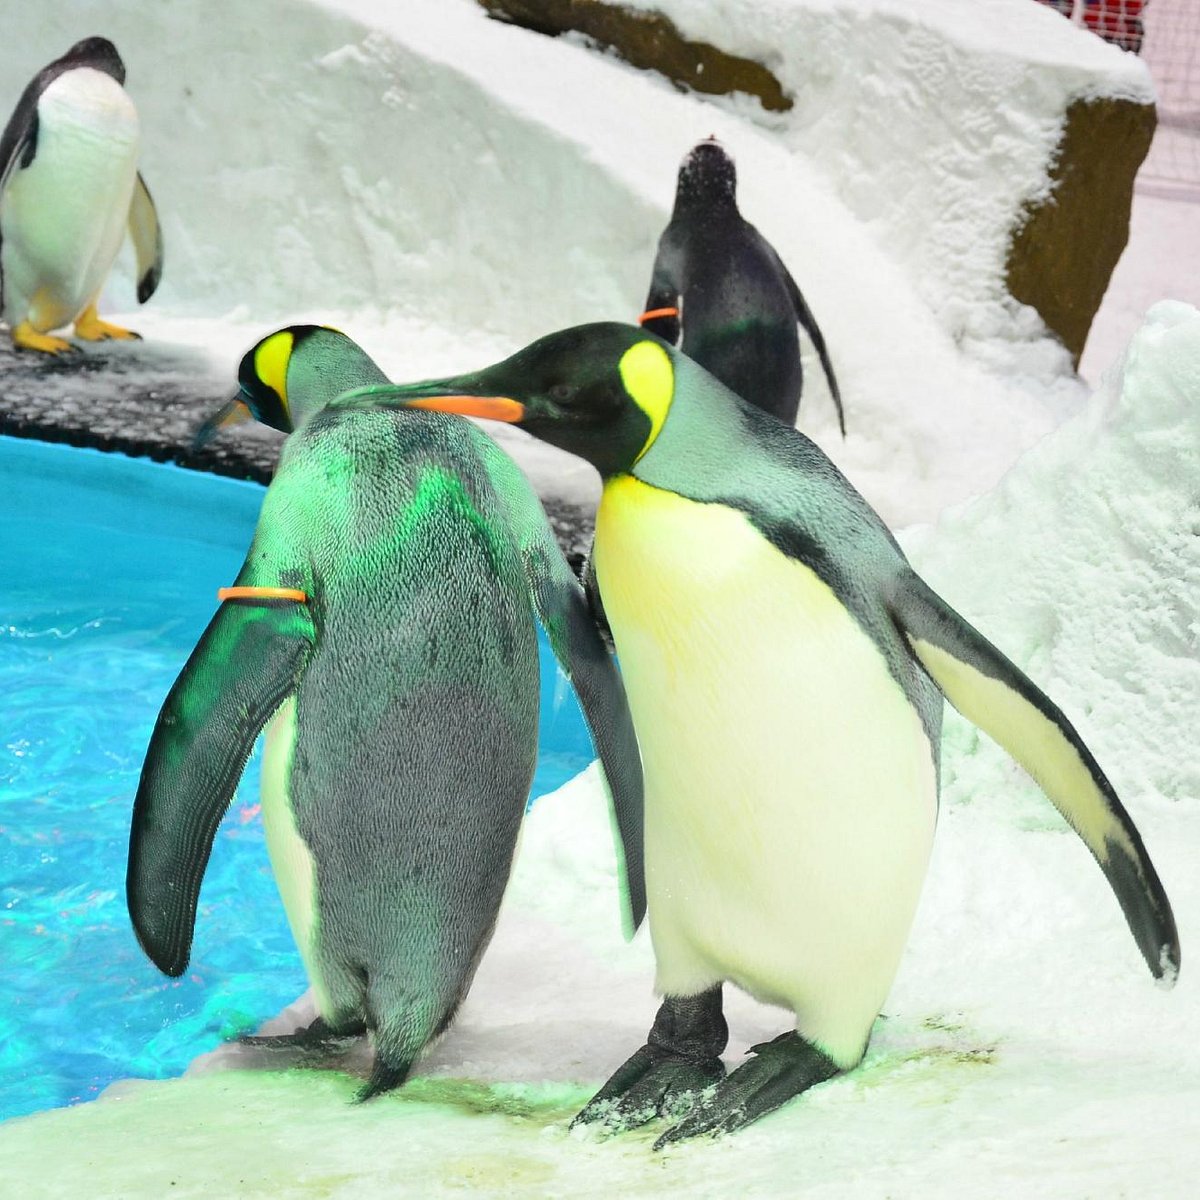 Snow Penguins at Ski Dubai - All You Need to Know BEFORE You Go